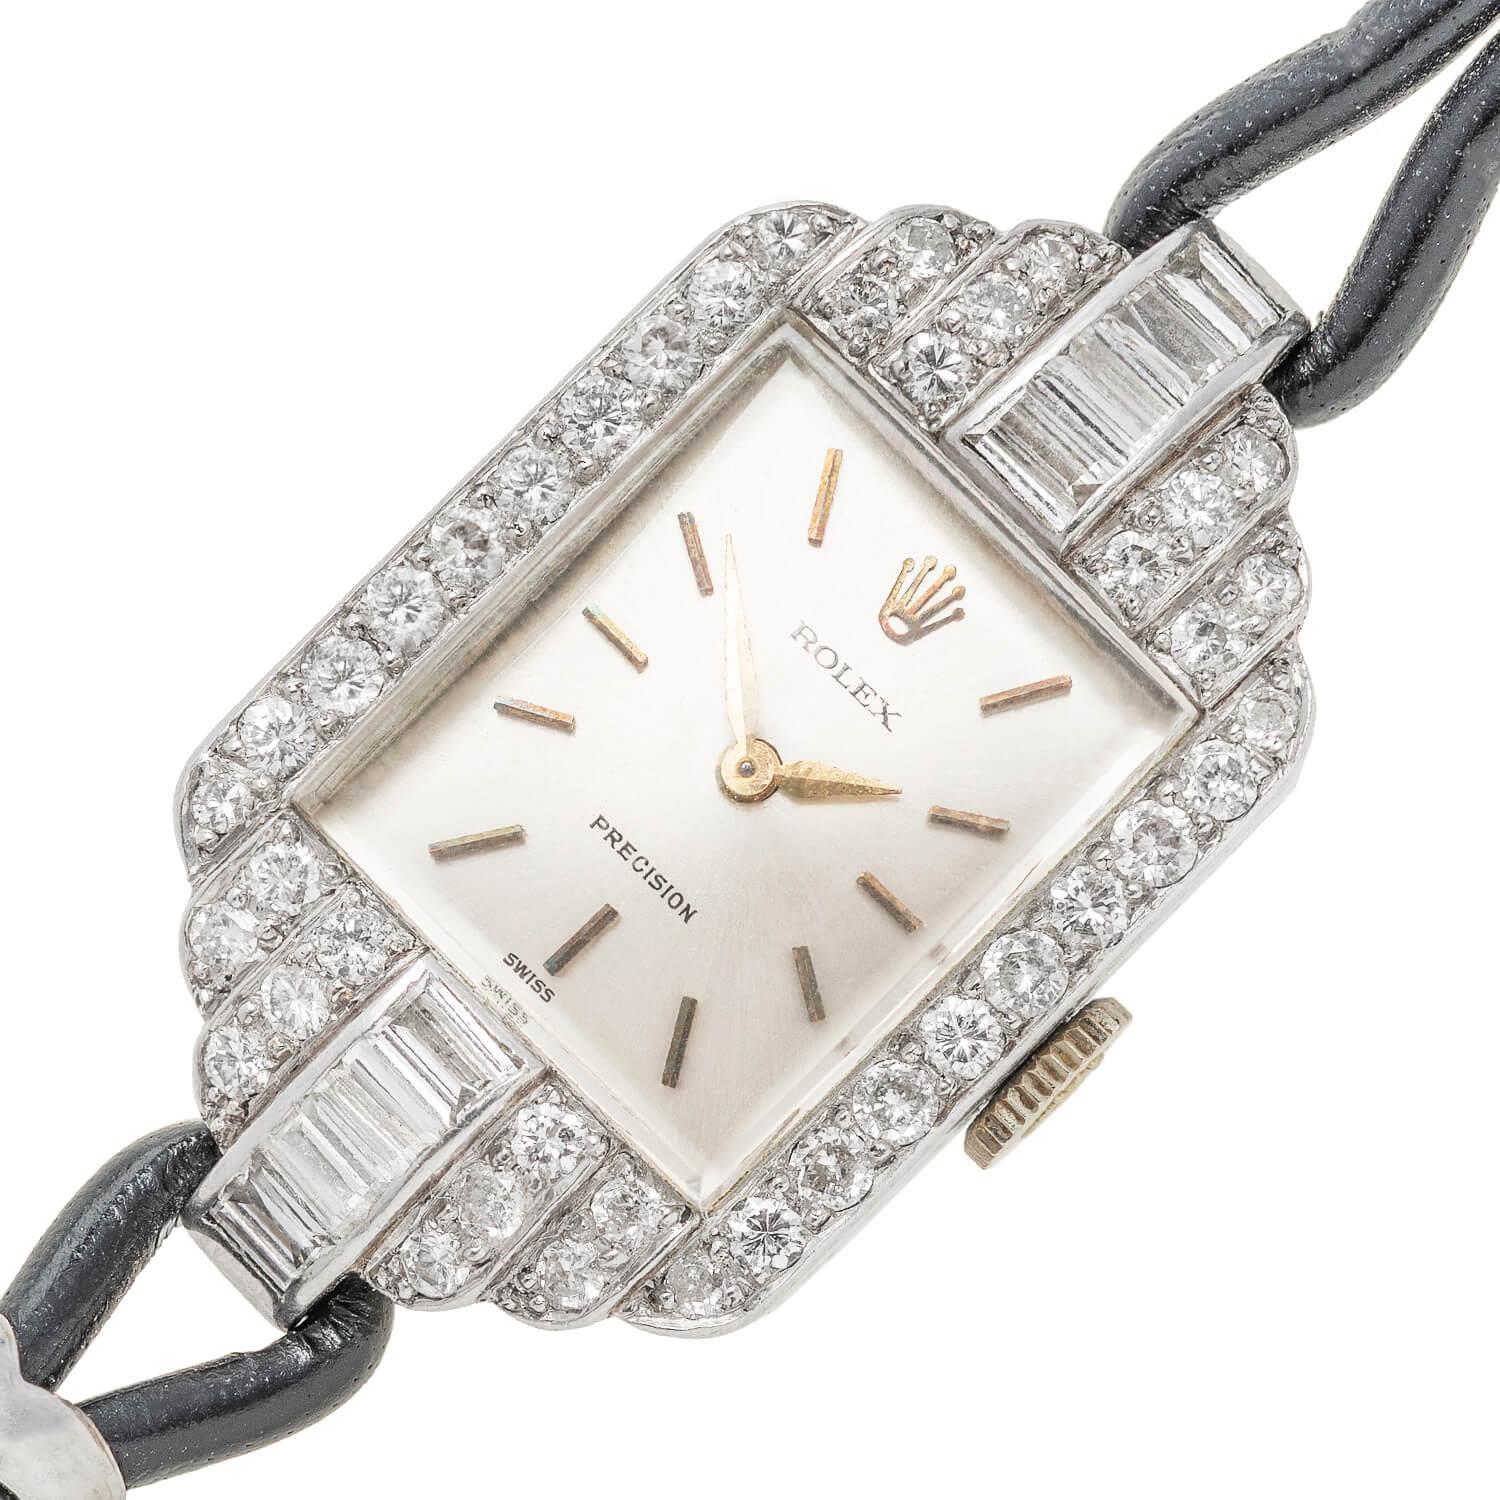 A gorgeous Retro (ca1940s) era Rolex watch! Crafted in platinum, this lovely watch is encrusted with 40 glittering Round Cut and 8 sparkling Baguette diamonds! The approximate 1.75ctw of diamonds adorn the surface of the case in an Art Deco tiered